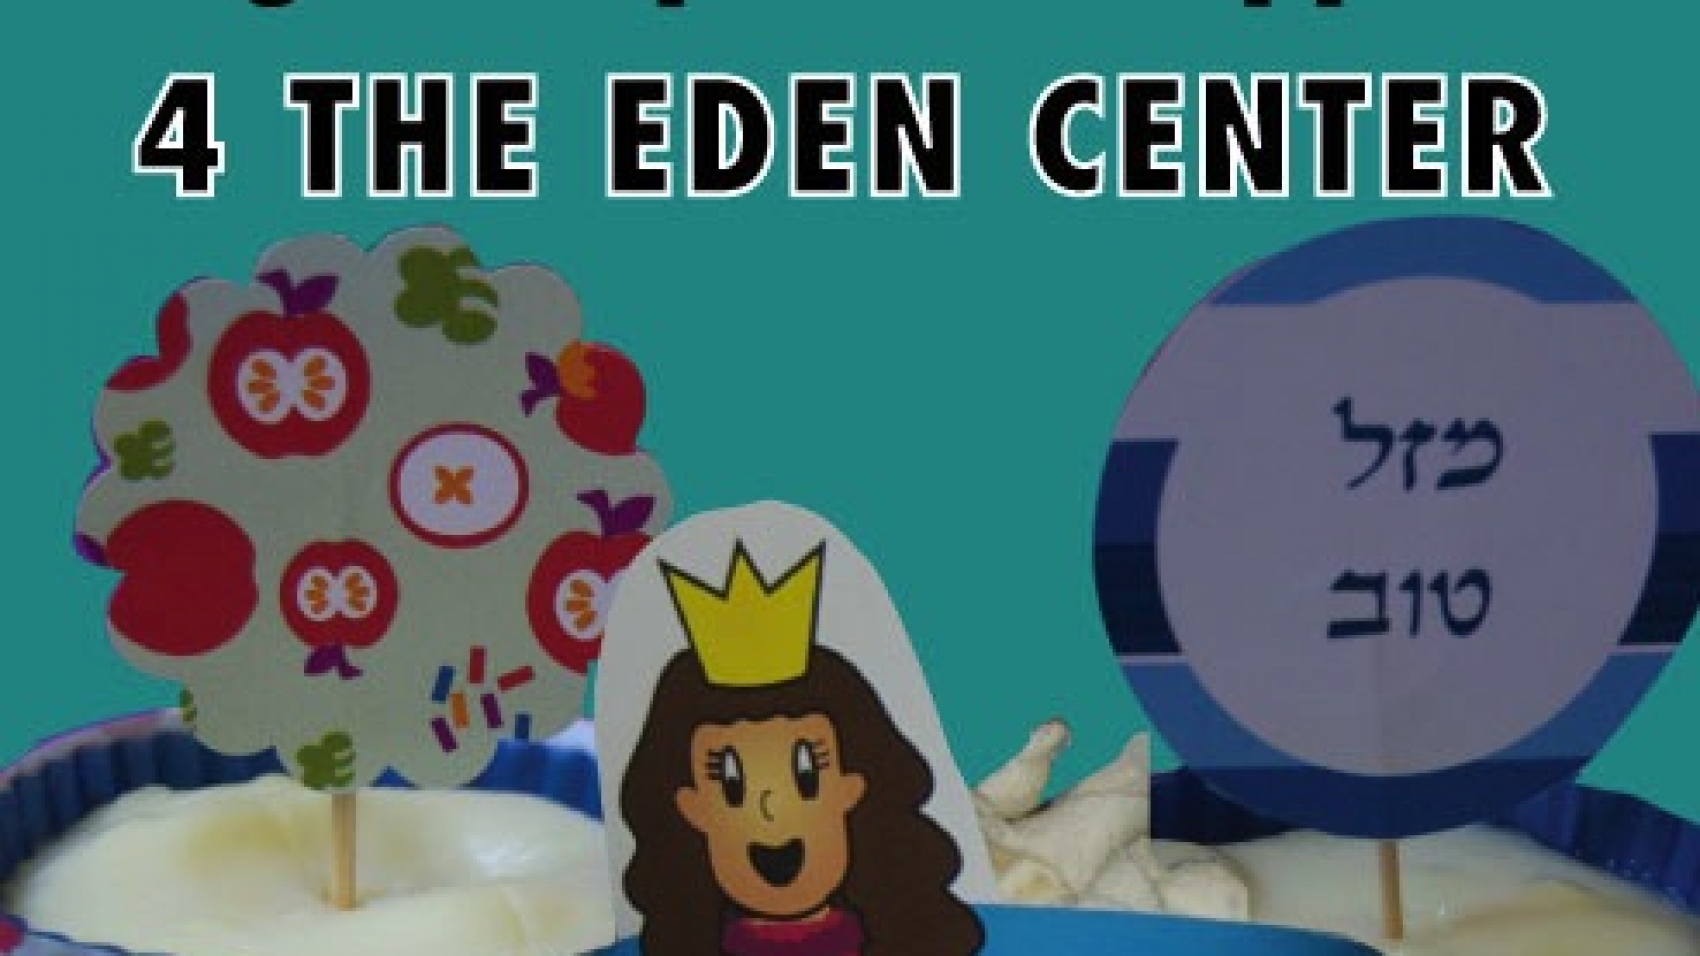 giving tuesday israel donor gifts for the eden center